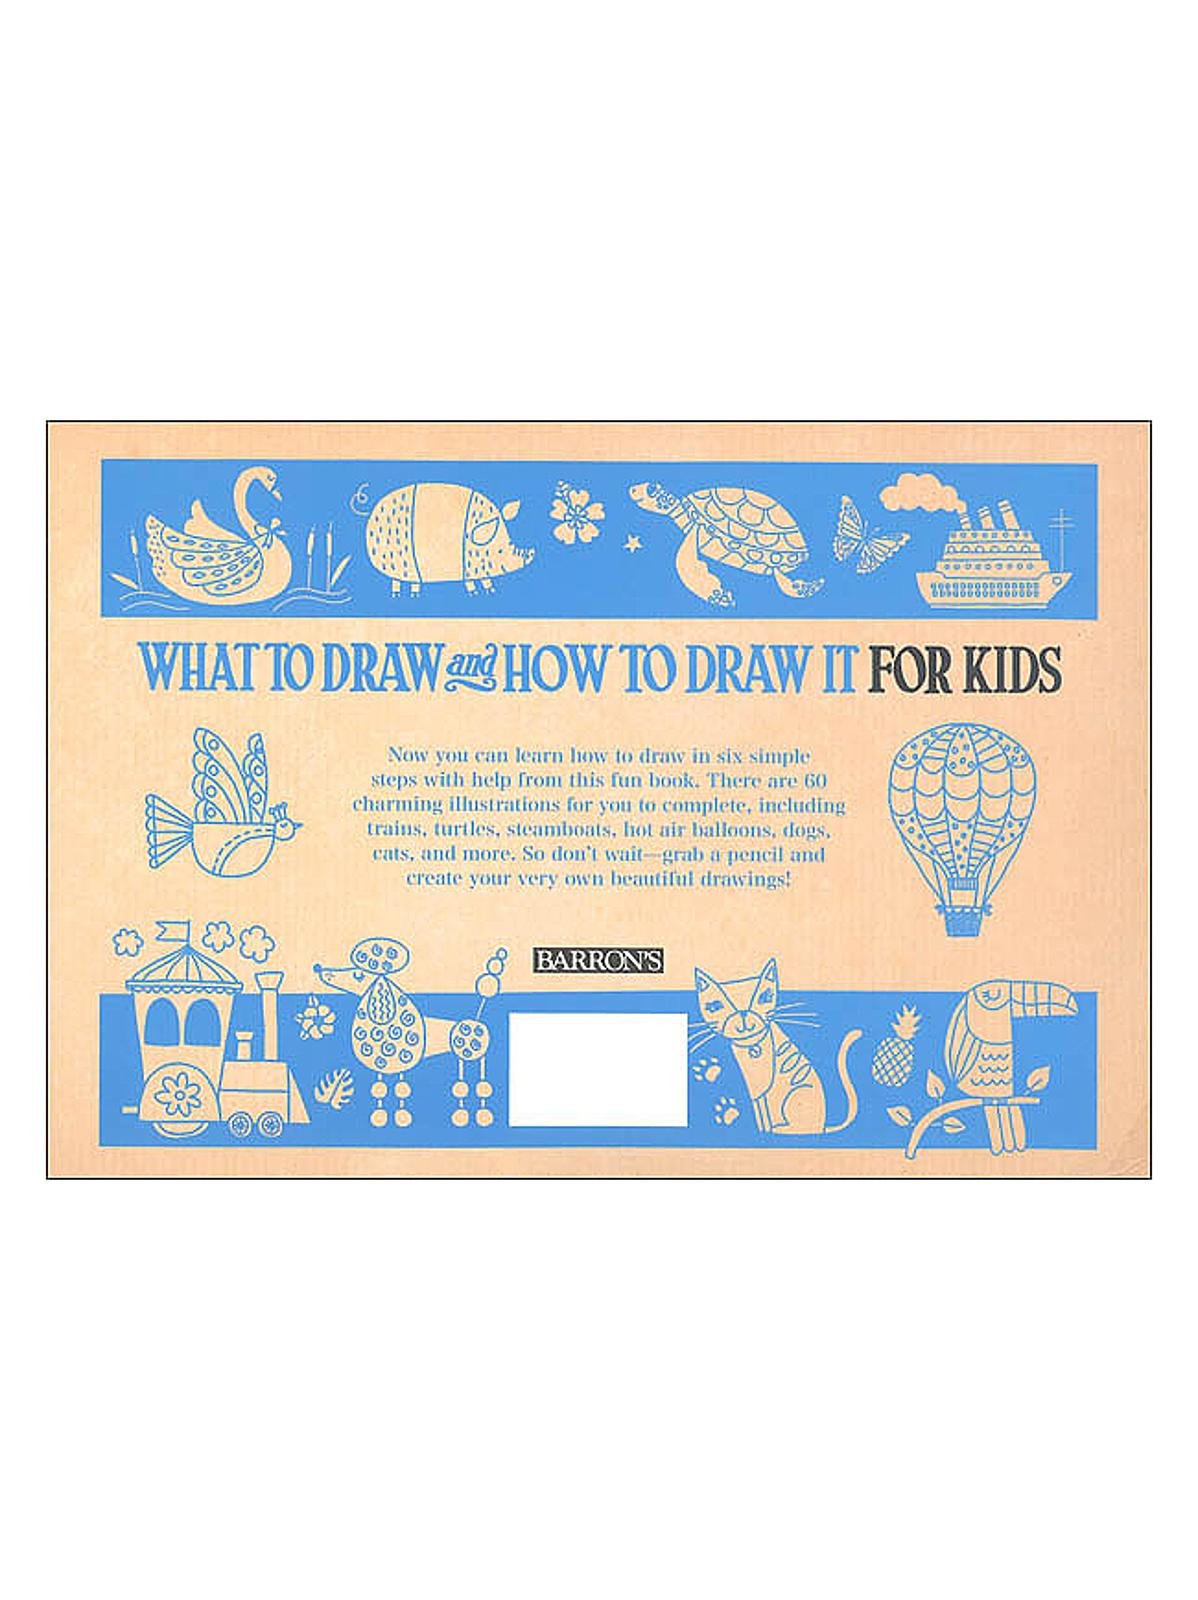 Barron's - What to Draw and How to Draw It for Kids